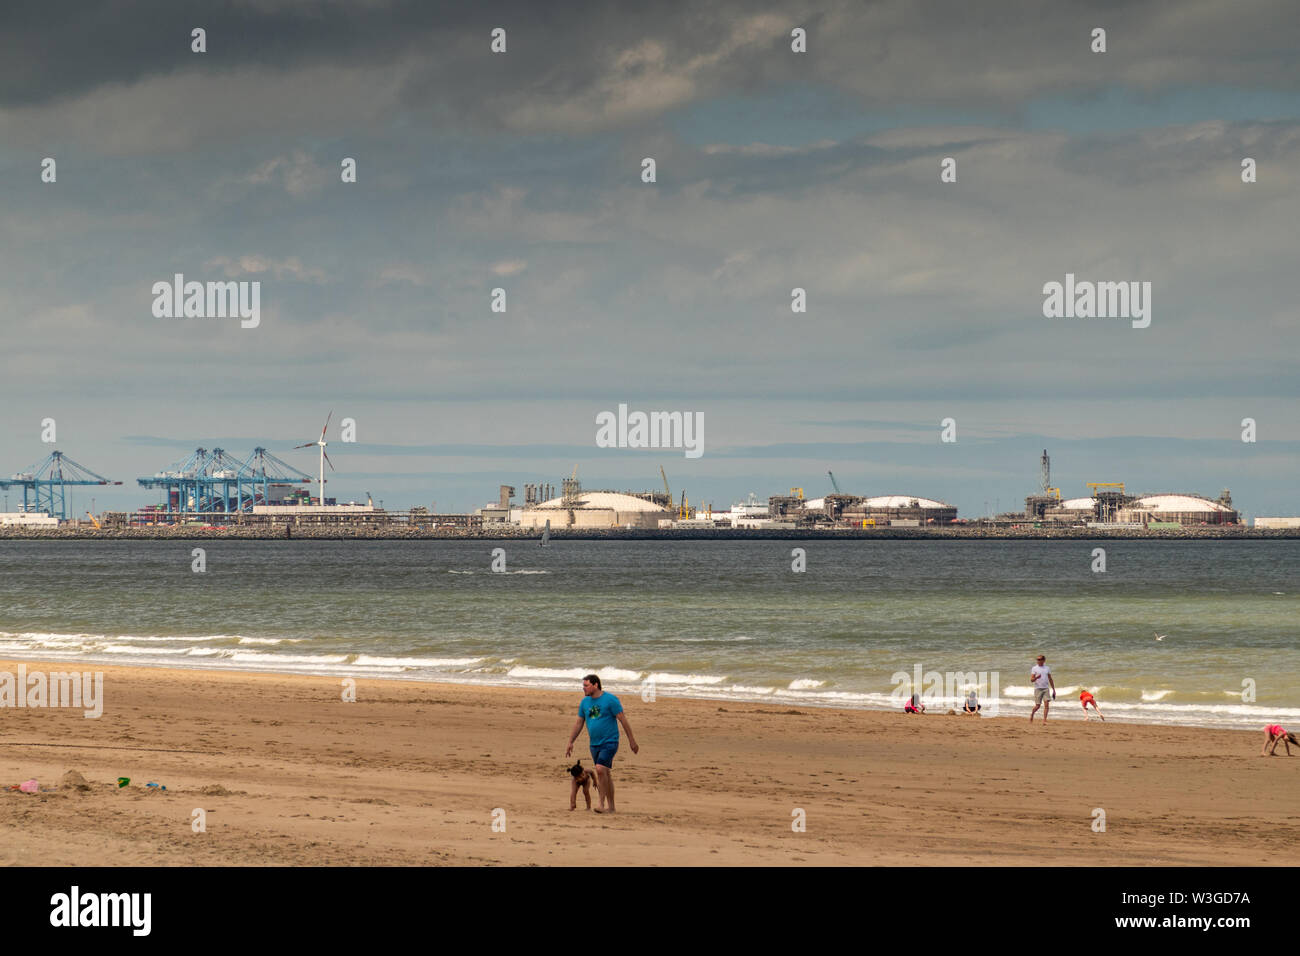 Knokke-Heist, Flanders, Belgium -  June 16, 2019: Knokke-Zoute part of town. View from sandy beach on LNG sea terminal and container cranes of Port of Stock Photo